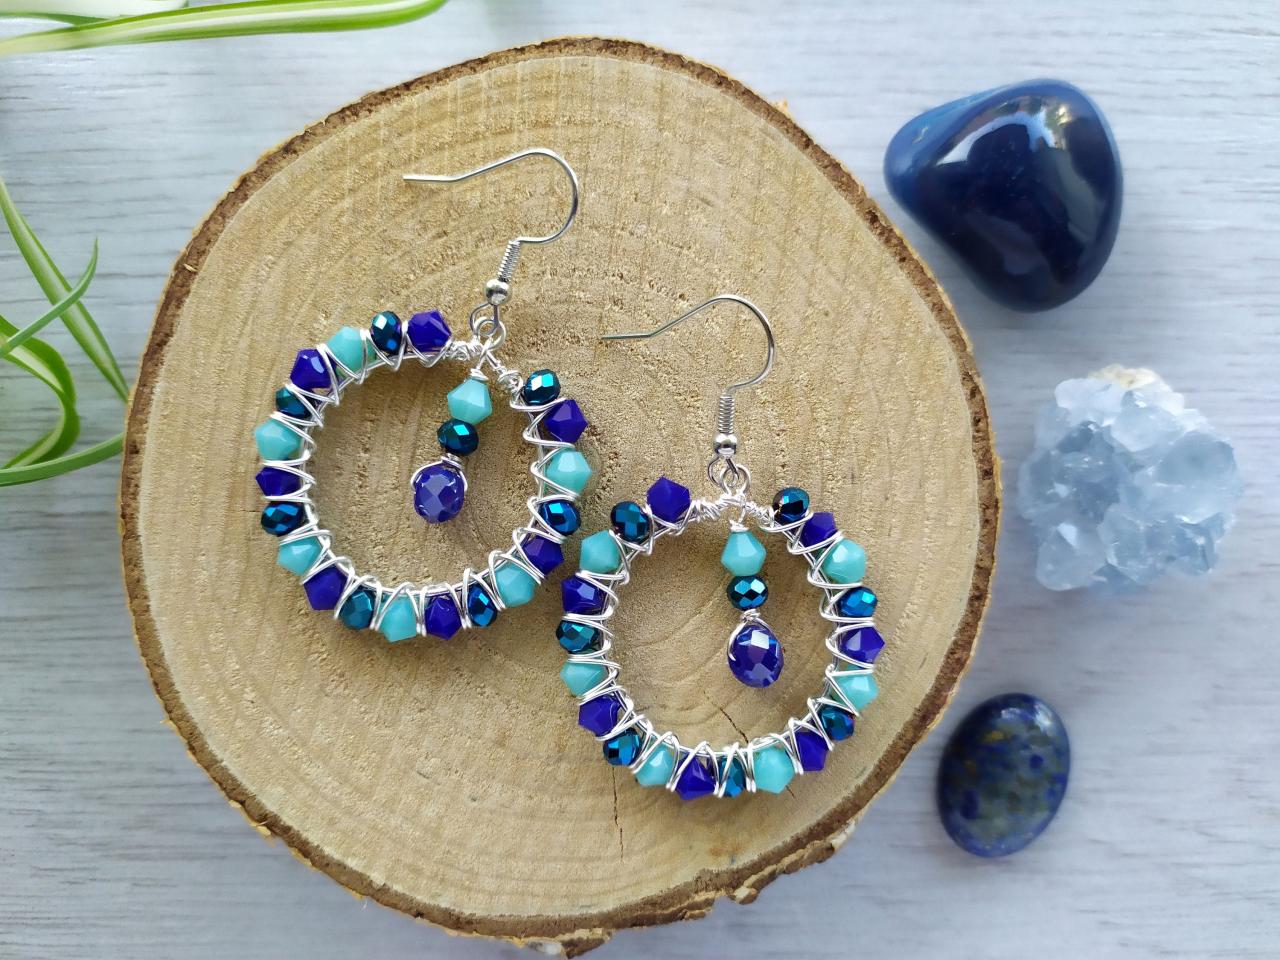 Dark Blue Turquoise Hoop Earrings, Small Hoops With Faceted Glass Beads, Blue Turquoise Boho Earrings, Wire Wrapped Hoops With Dangle